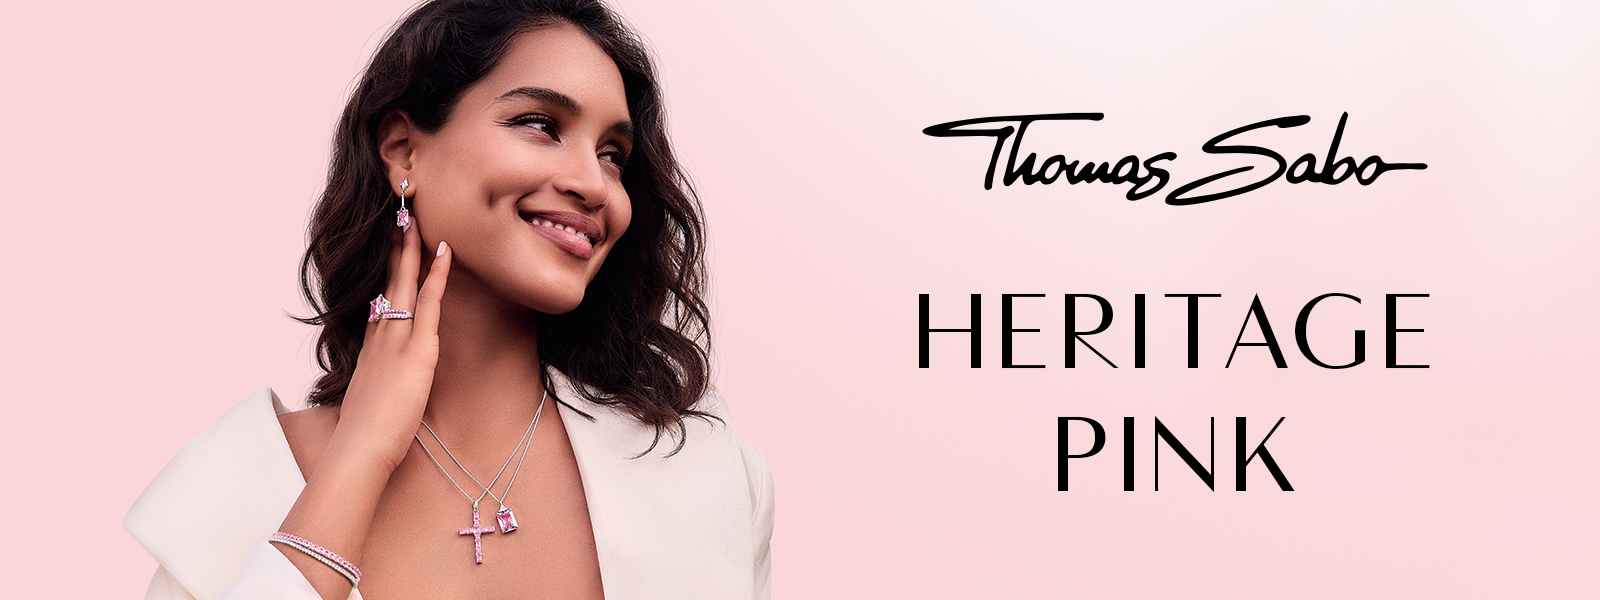 THOMAS SABO NEW SPARKLING HERITAGE PINK COLLECTION